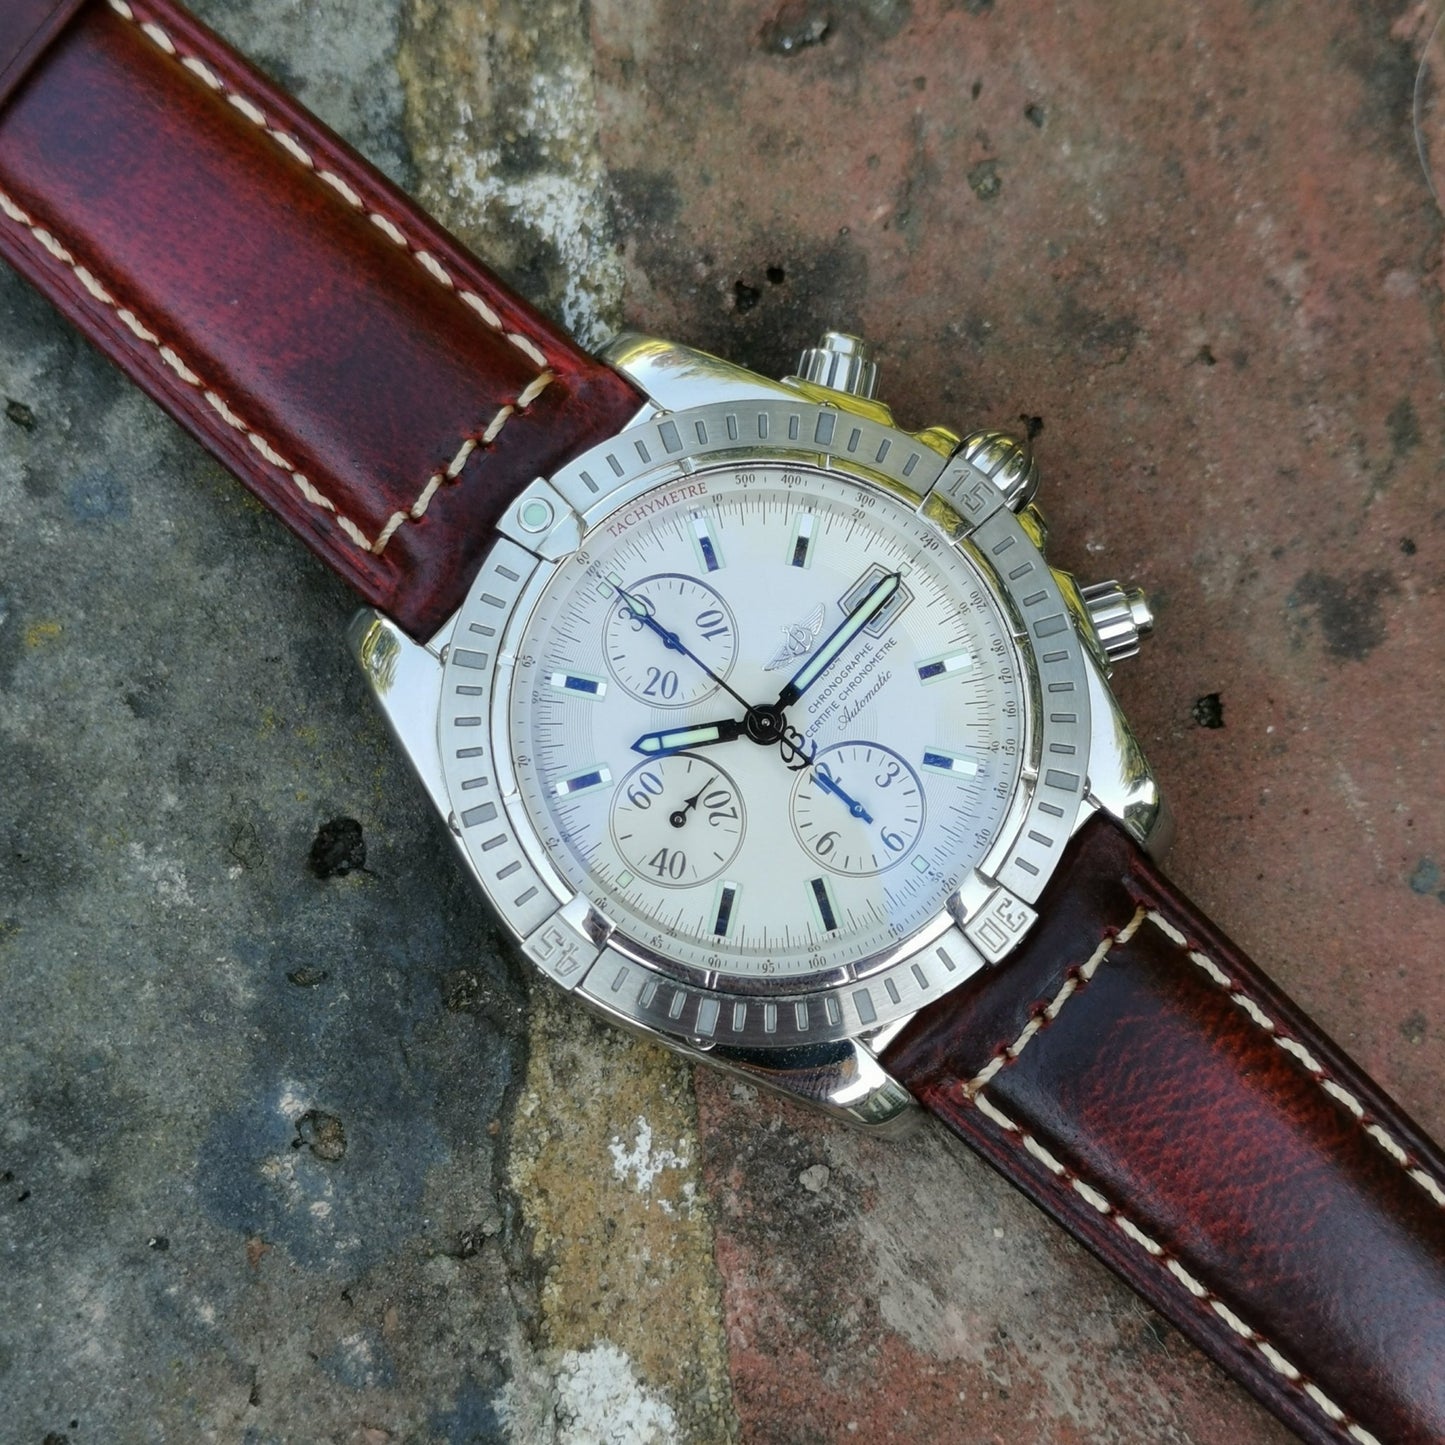 Berlin burgundy full grain leather watch strap. Watch strap placed on a Breitling Evolution Chronomat. Watch And Strap.